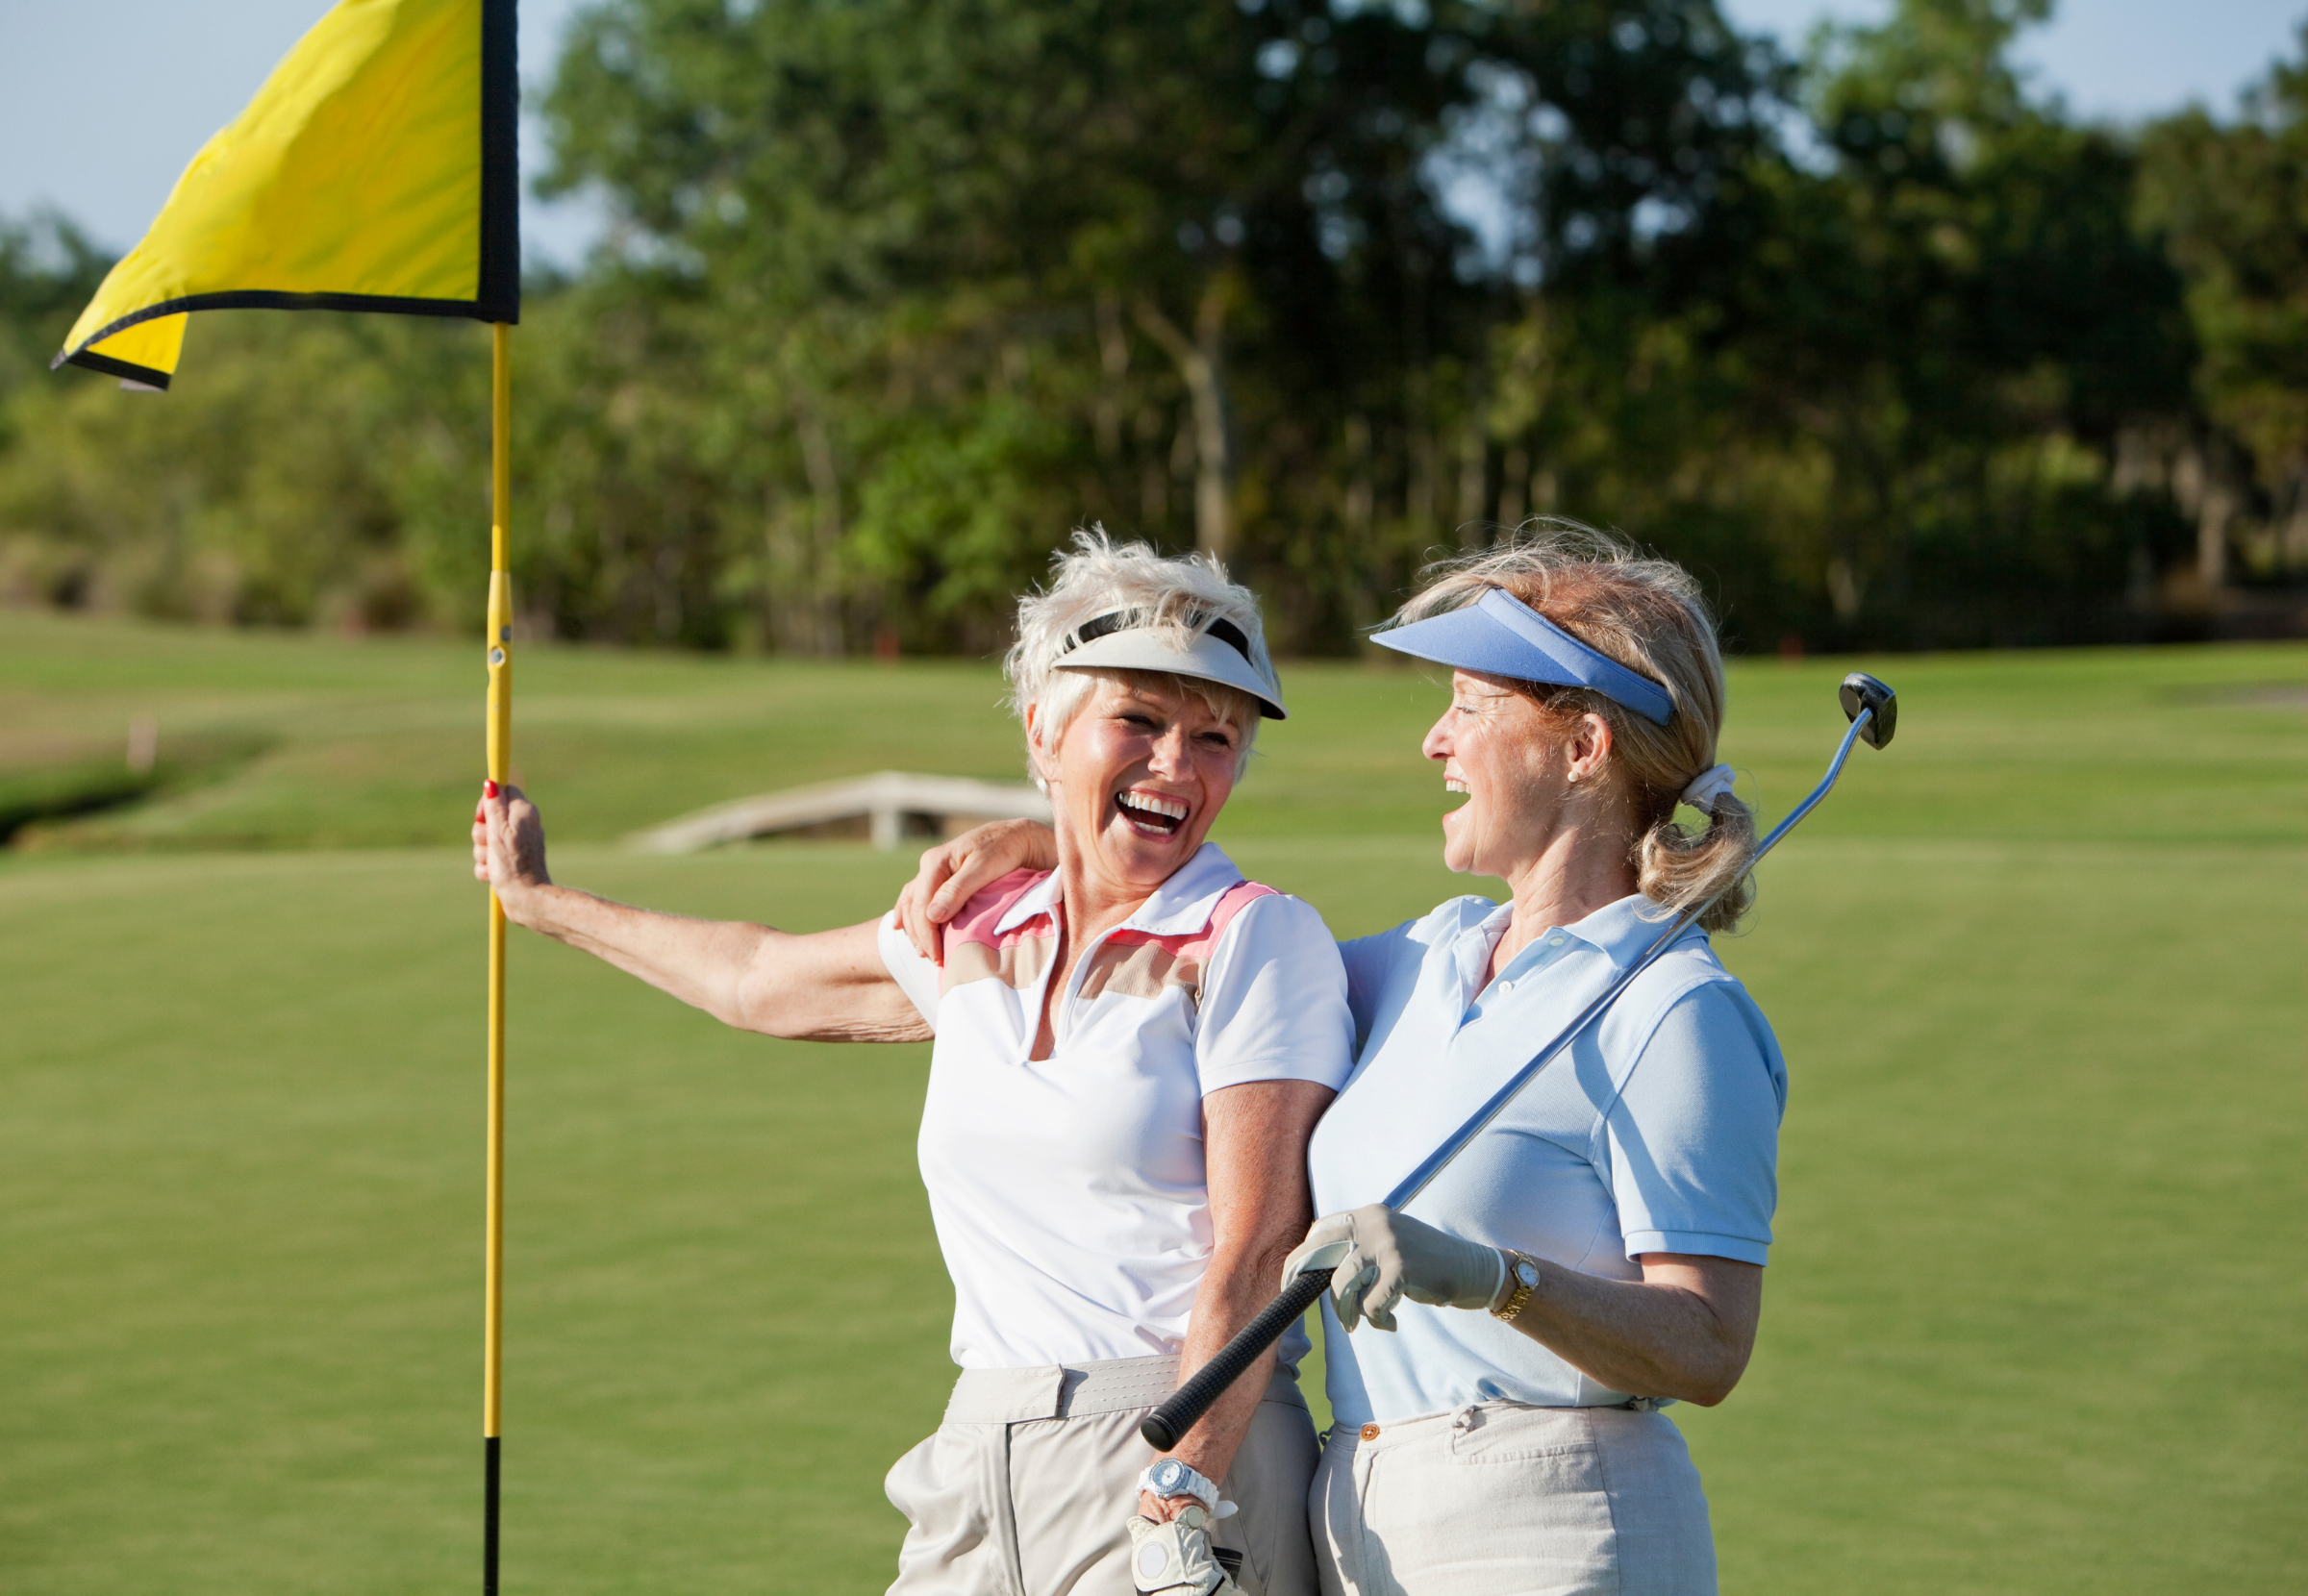 Elderly women smiling on a golf course.